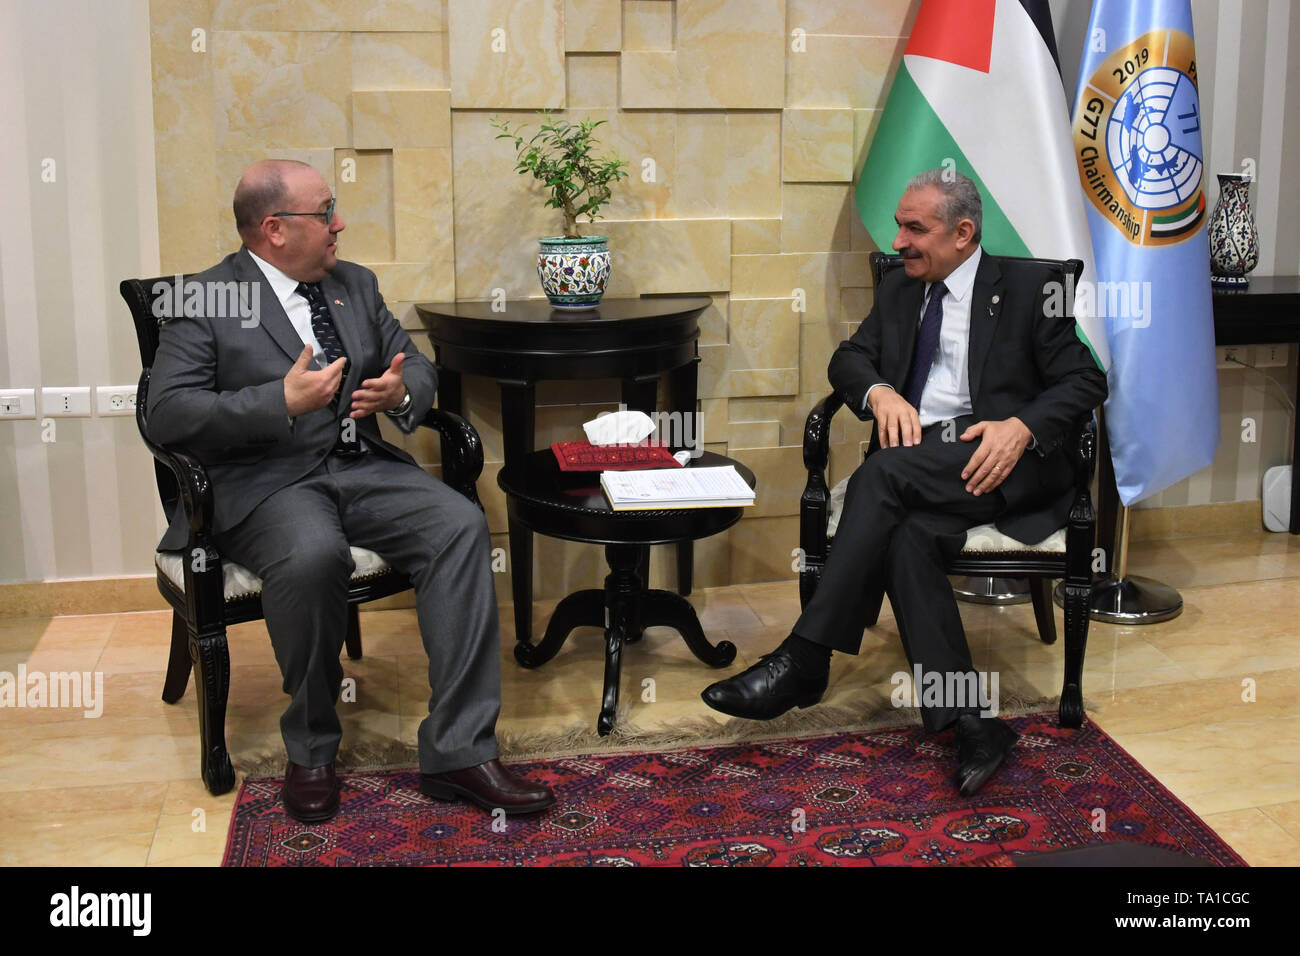 May 21, 2019 - Bethlehem, West Bank, Palestinian Territory - Palestinian Prime Minister Mohammad Ishtayeh meets with Reuben Gauci, the representative of the Republic of Malta in Palestine, in the West Bank city of Ramallah, May 21, 2019  (Credit Image: © Prime Minister Office/APA Images via ZUMA Wire) Stock Photo